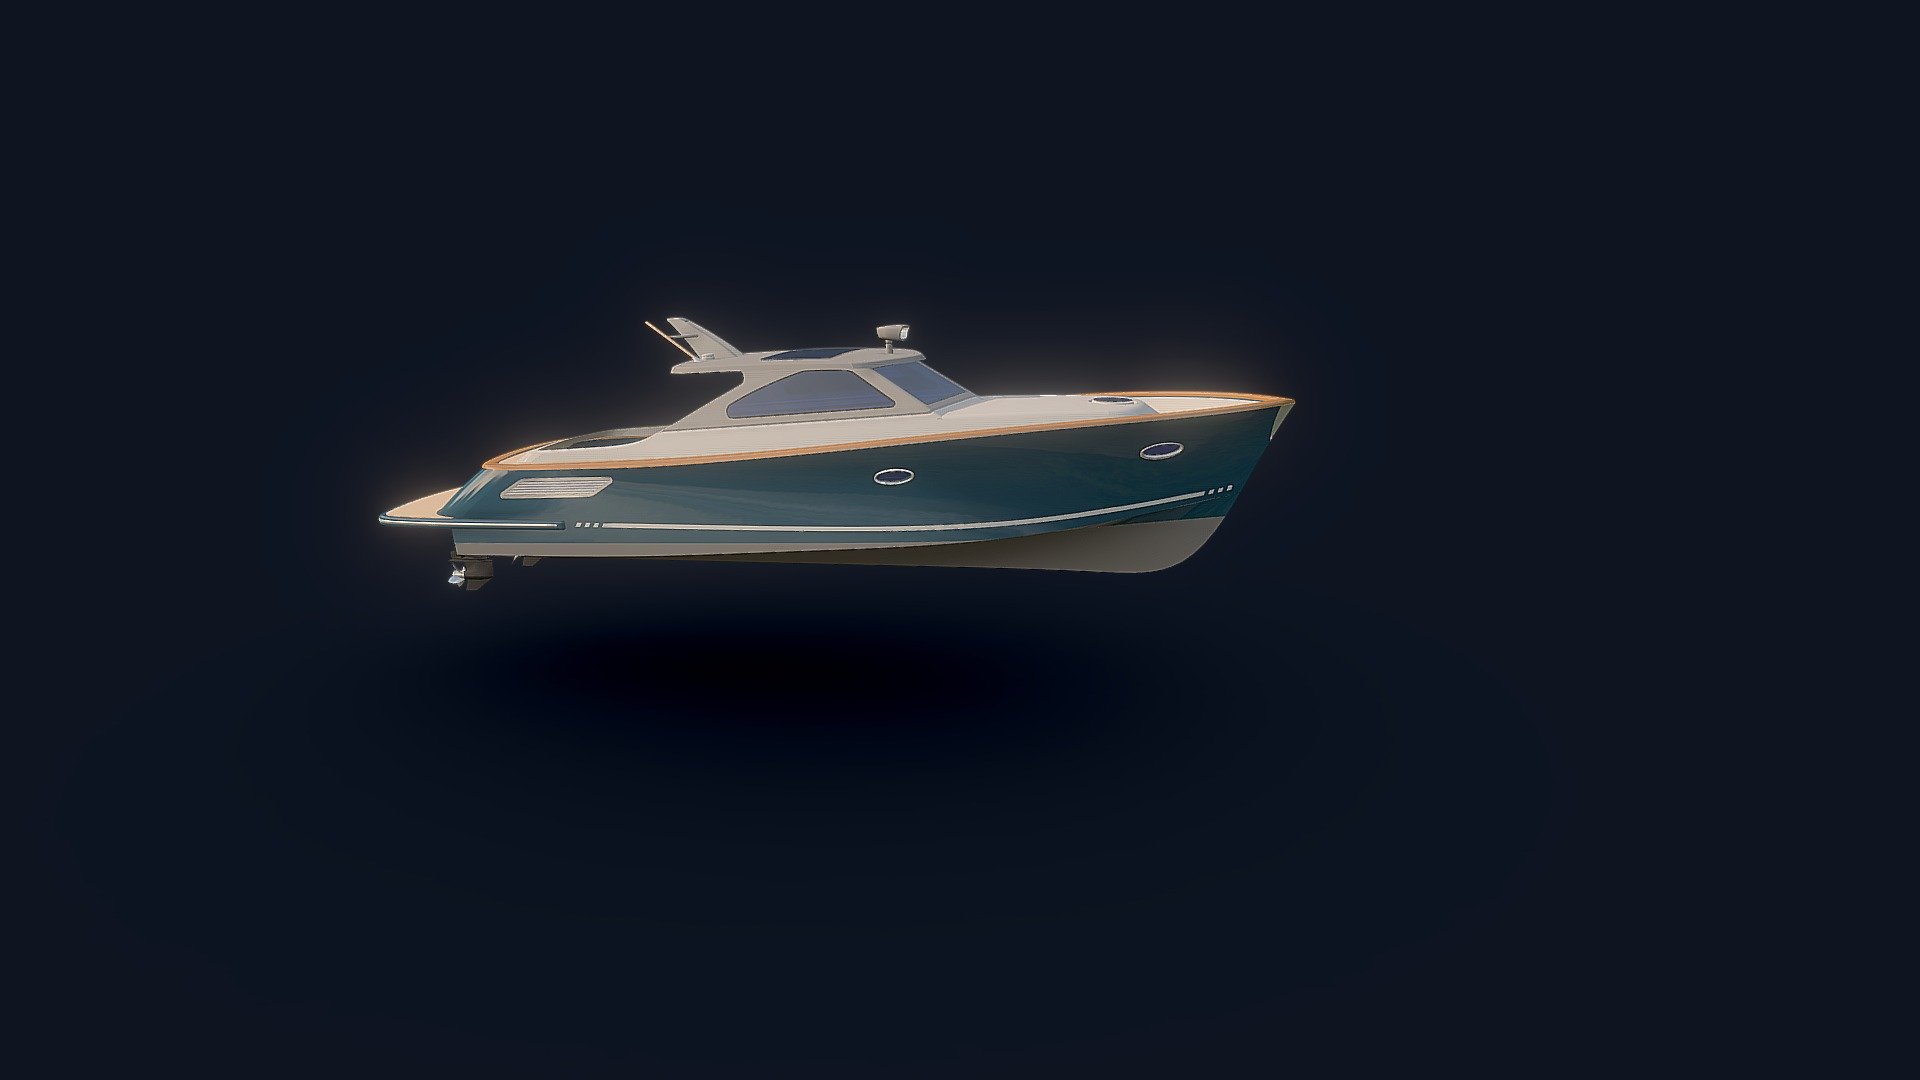 Not finished yet.

thanks to Capt Markus Rewinski for the stern drives 3d model